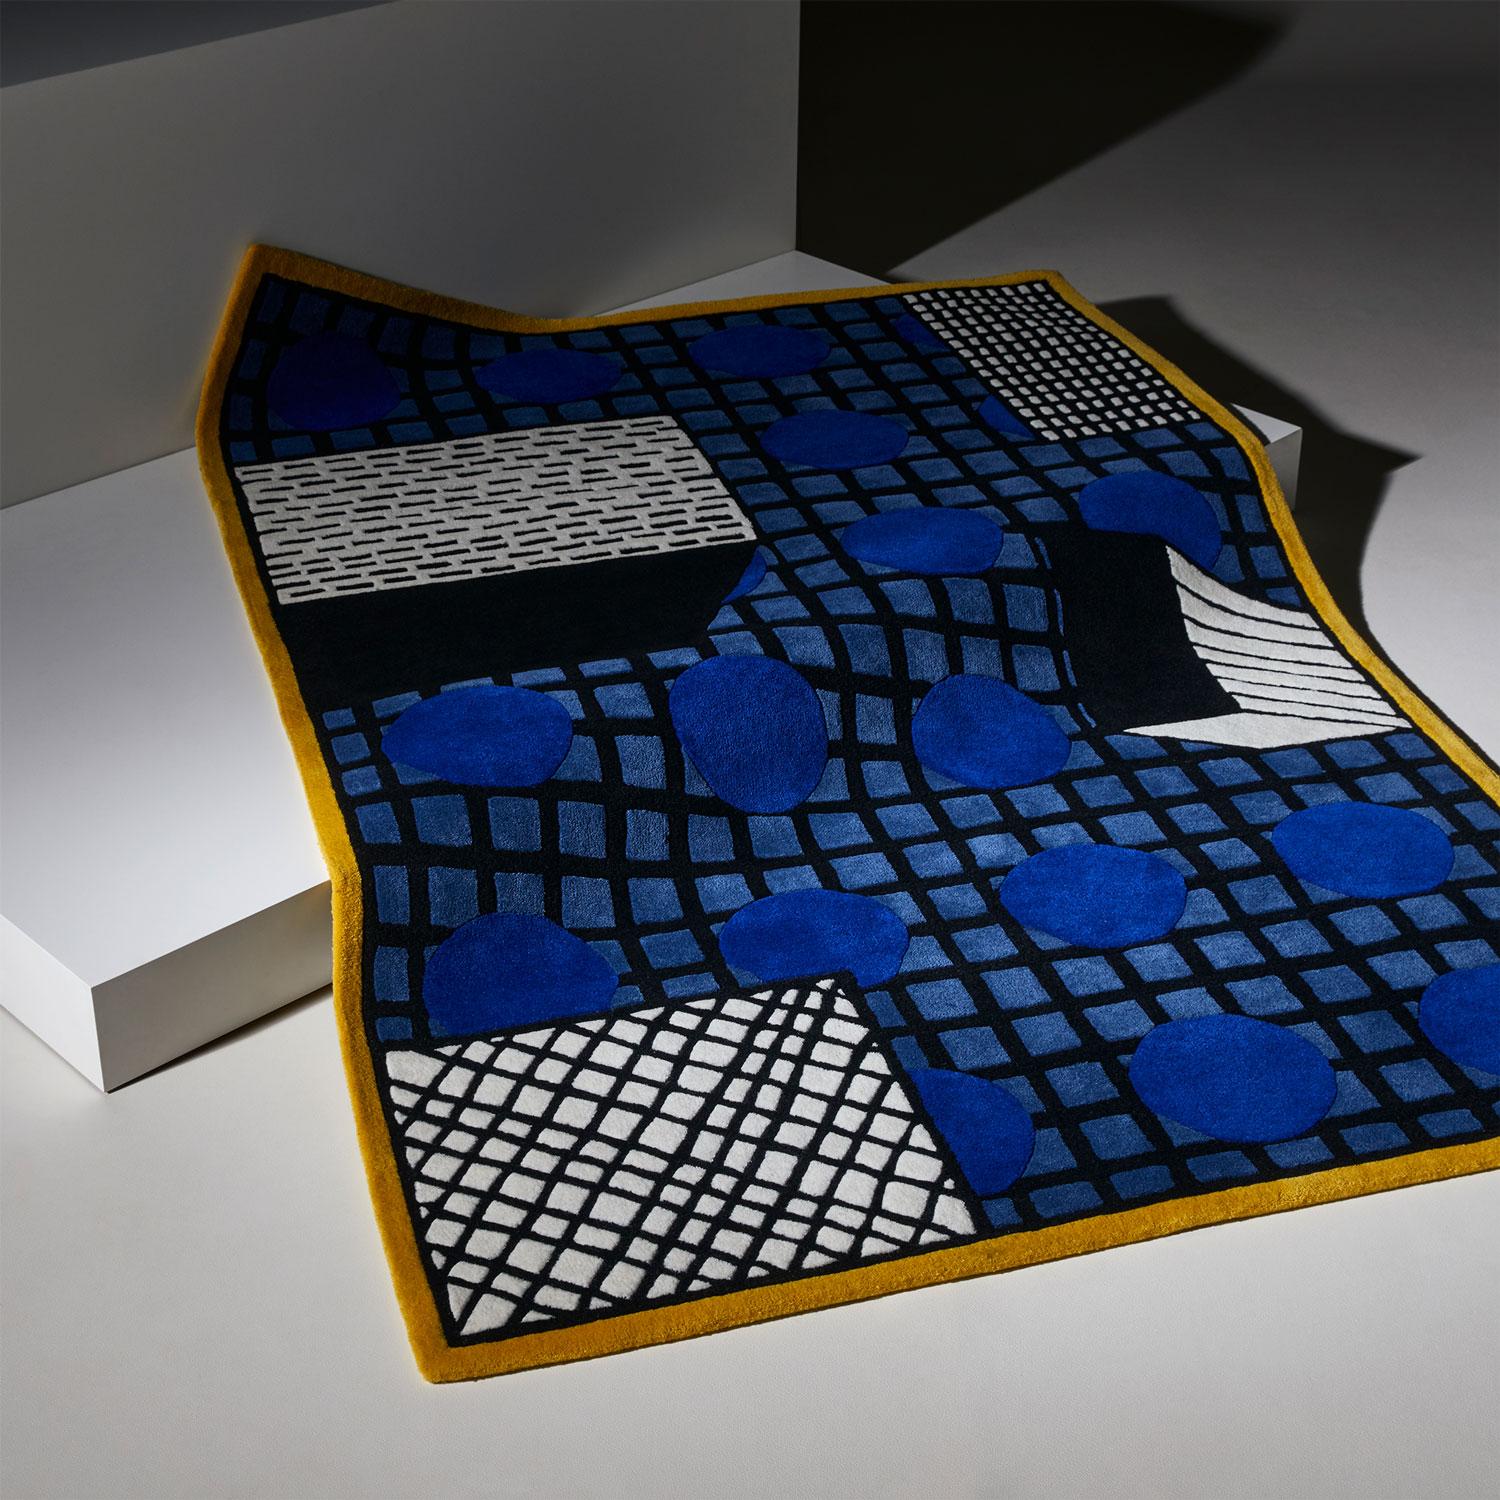 Tapigri rug by Nathalie Du Pasquier
Dimensions:200 x 290 cm
Made to order creations can be done

Tapigri is a construction of layered geometric patterns topped by 3 elements that give the rug an almost architectural presence.

 
Each rug is